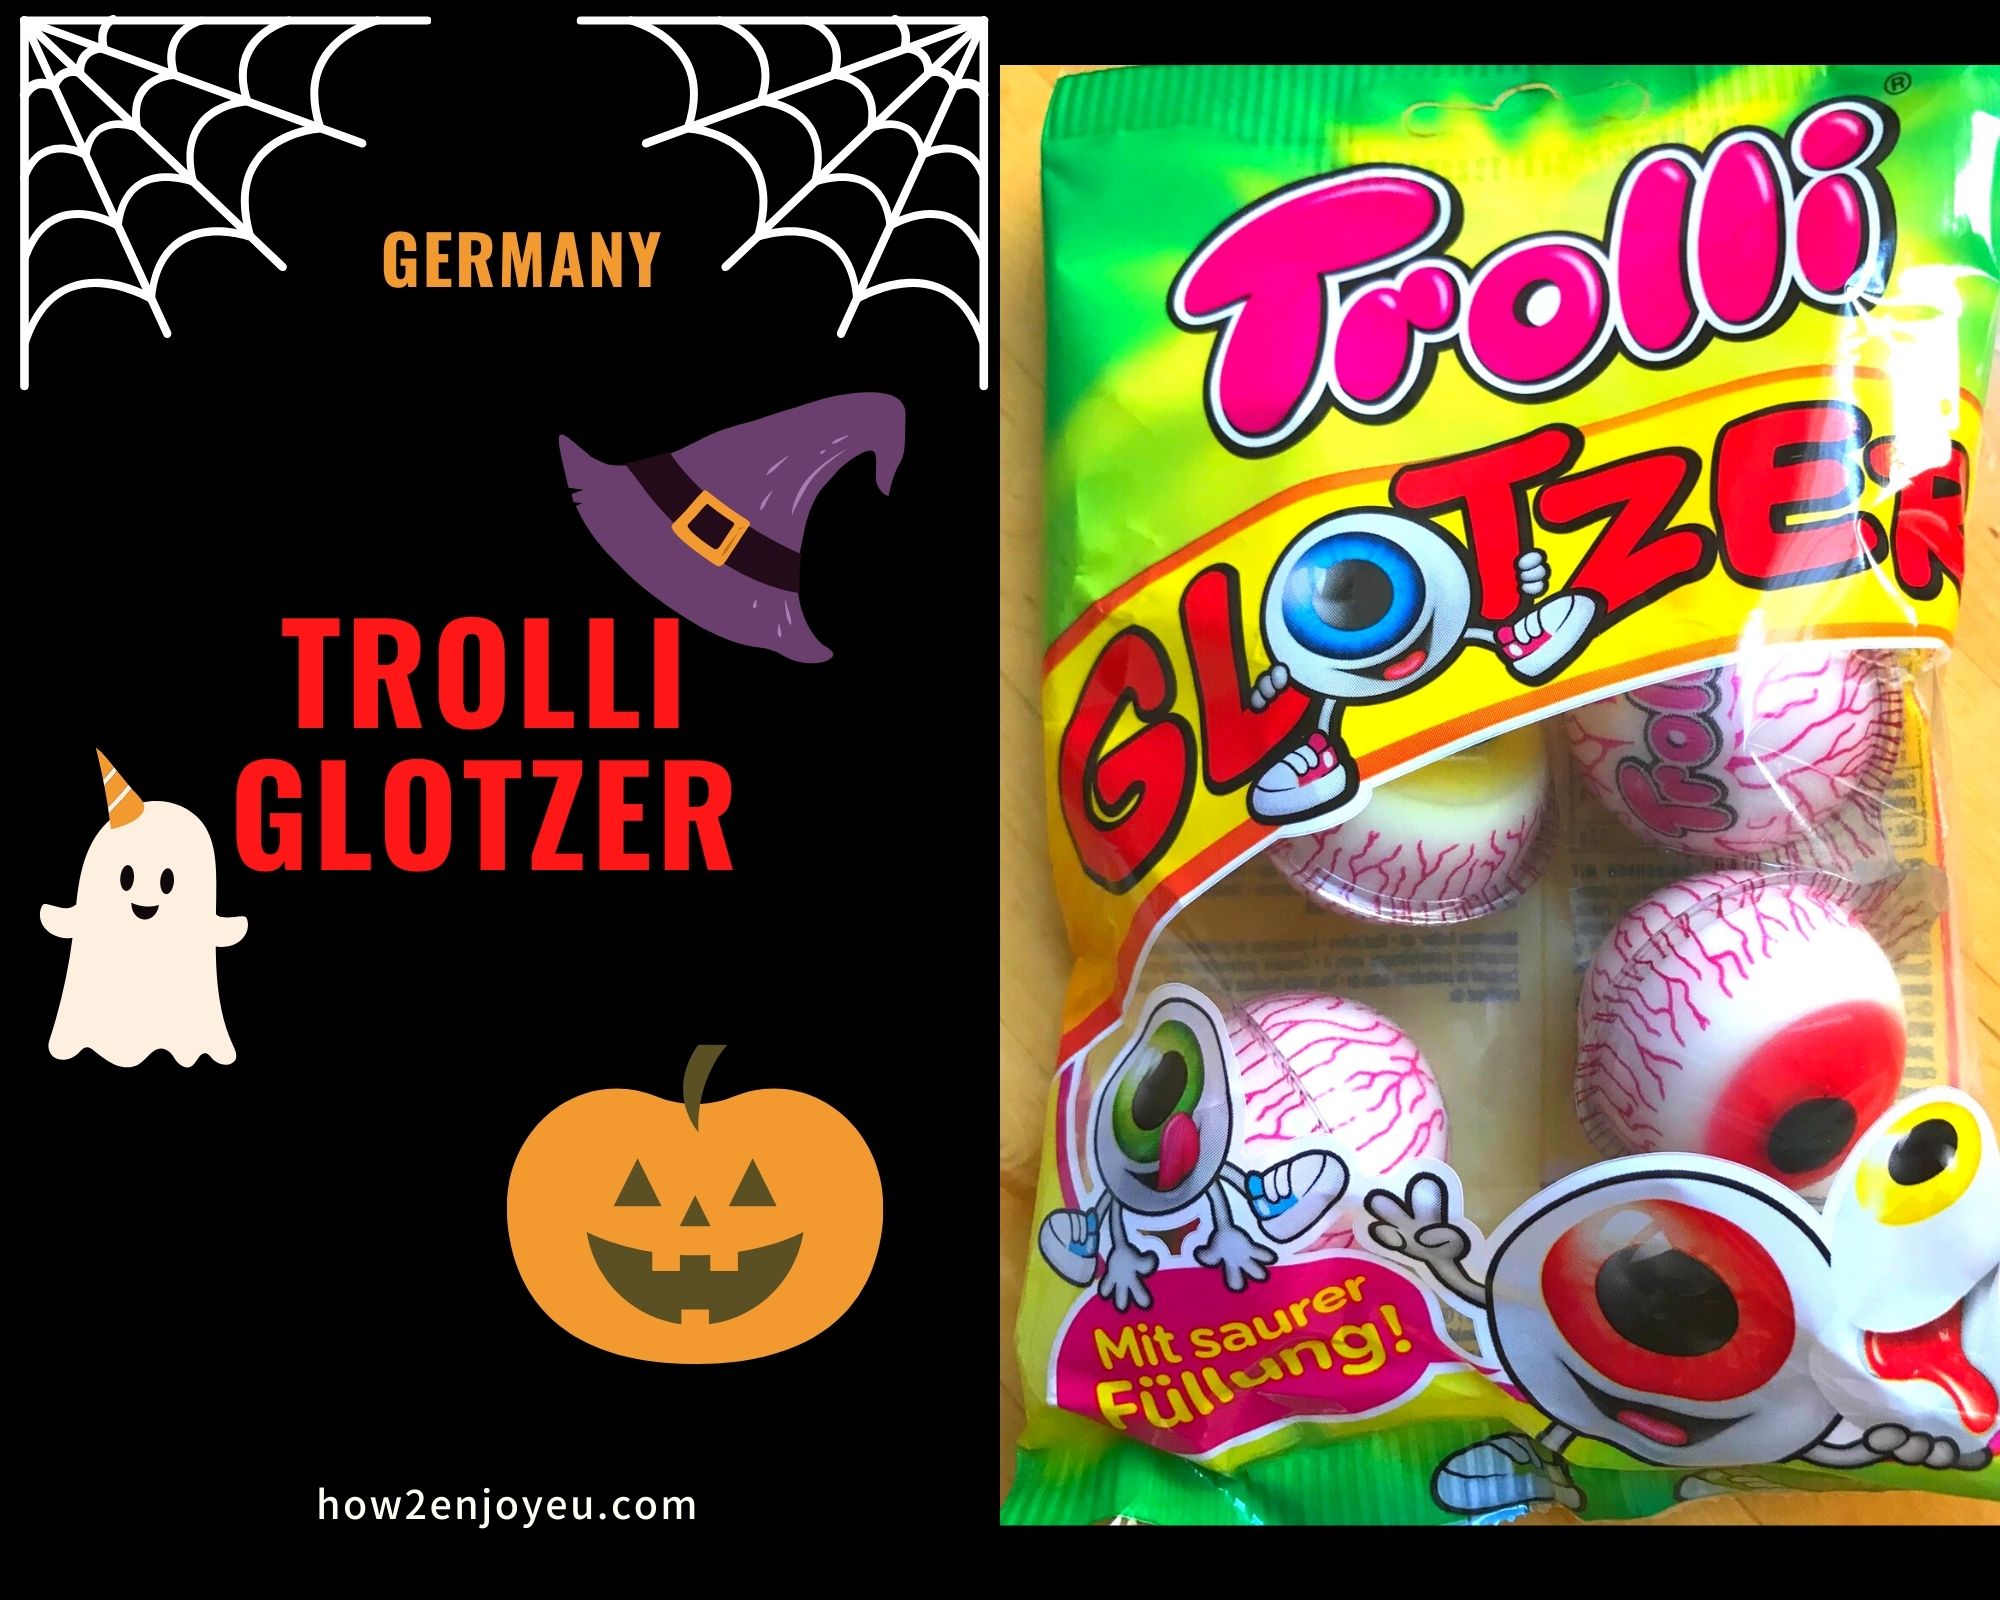 You are currently viewing ハロウィン前にゲットすべき、Trolliの目玉グミ「Glotzer」